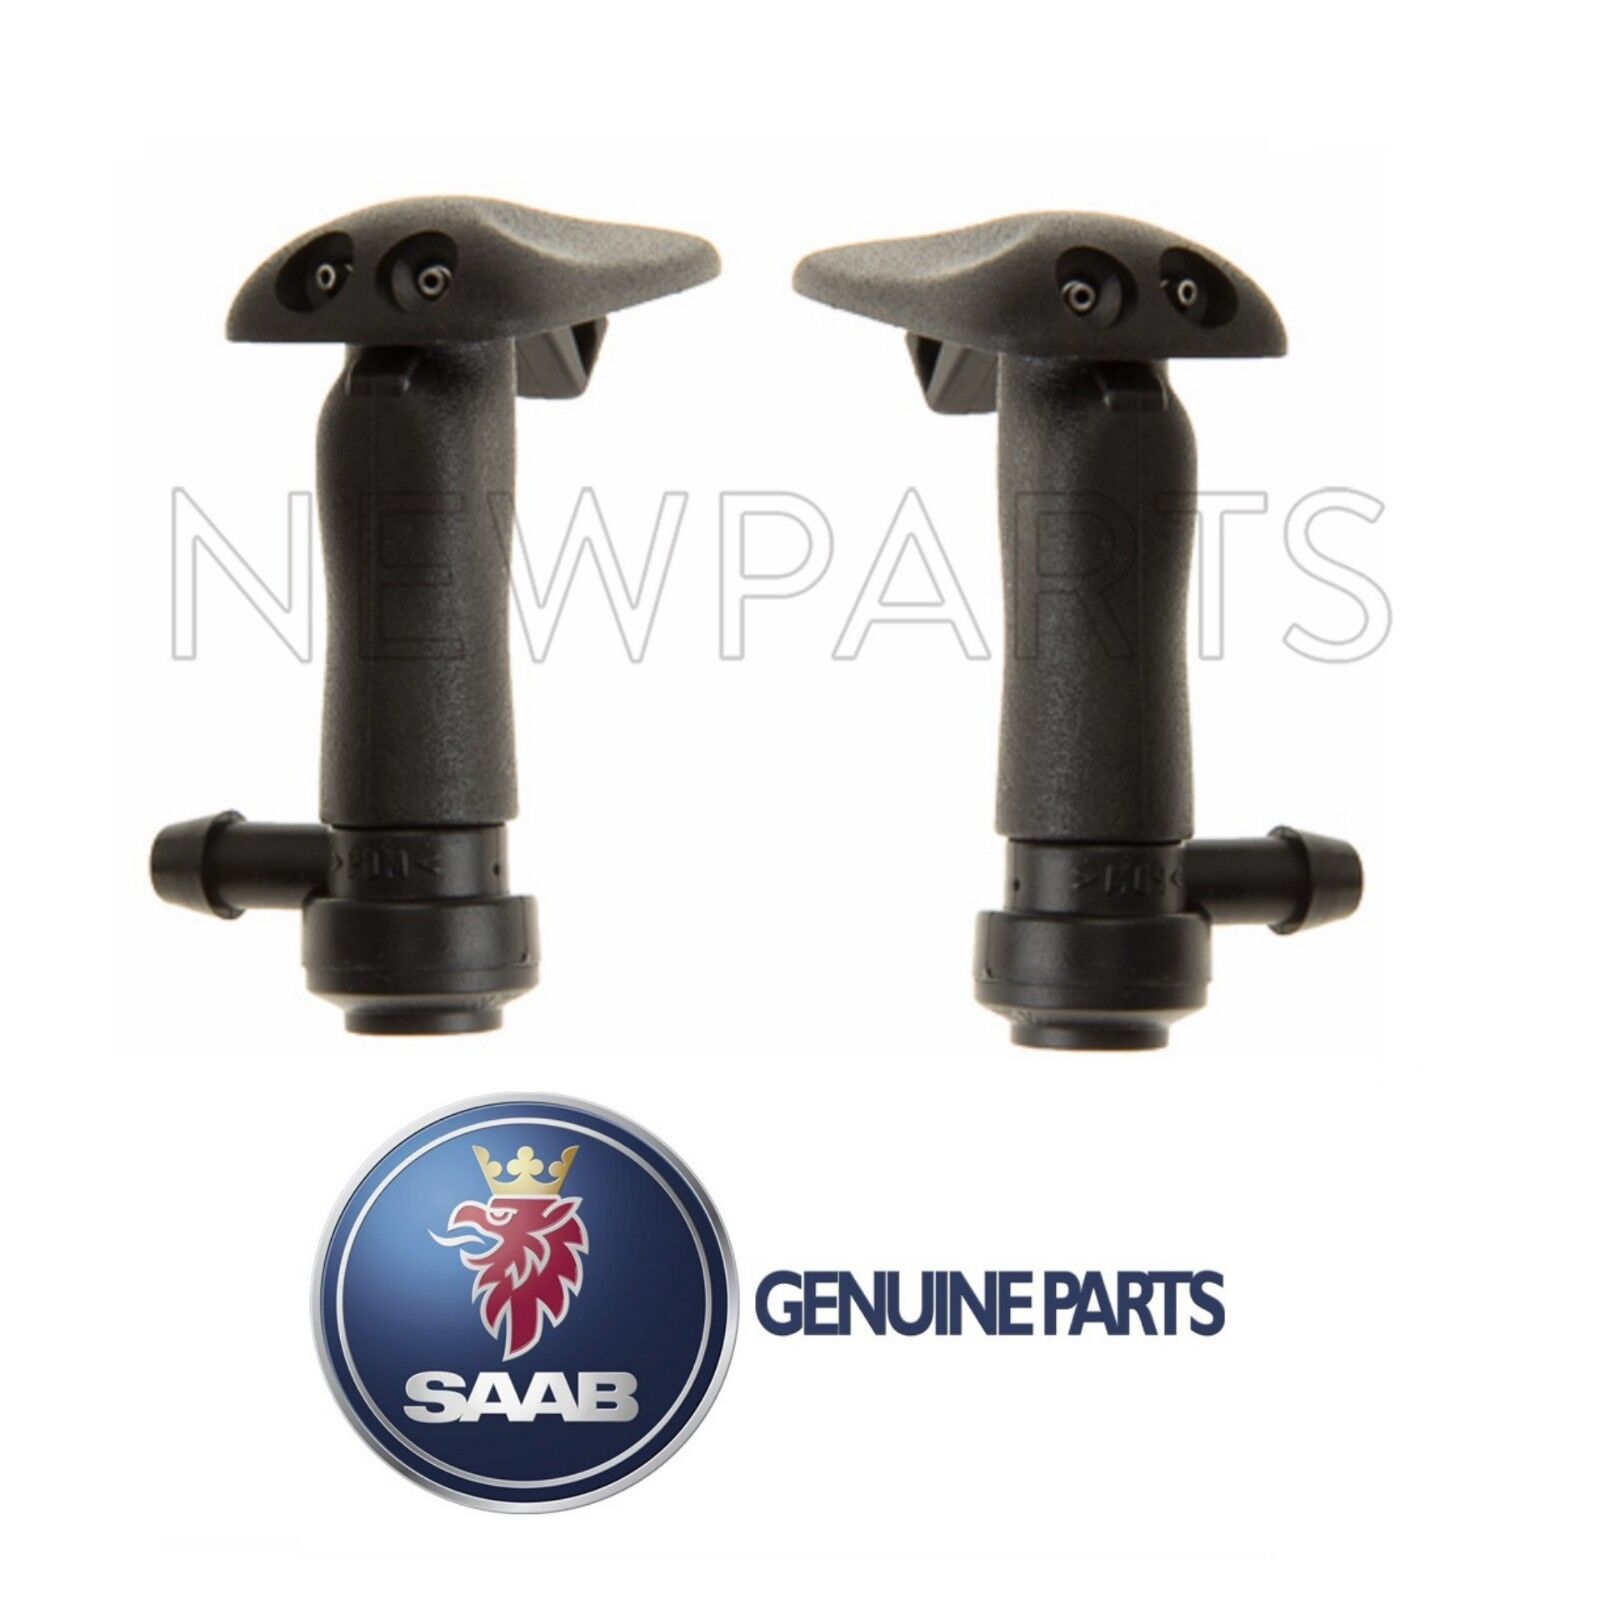 For Saab 9-3 2003-2009 Set of Front Left & Right Windshield Washer Nozzle